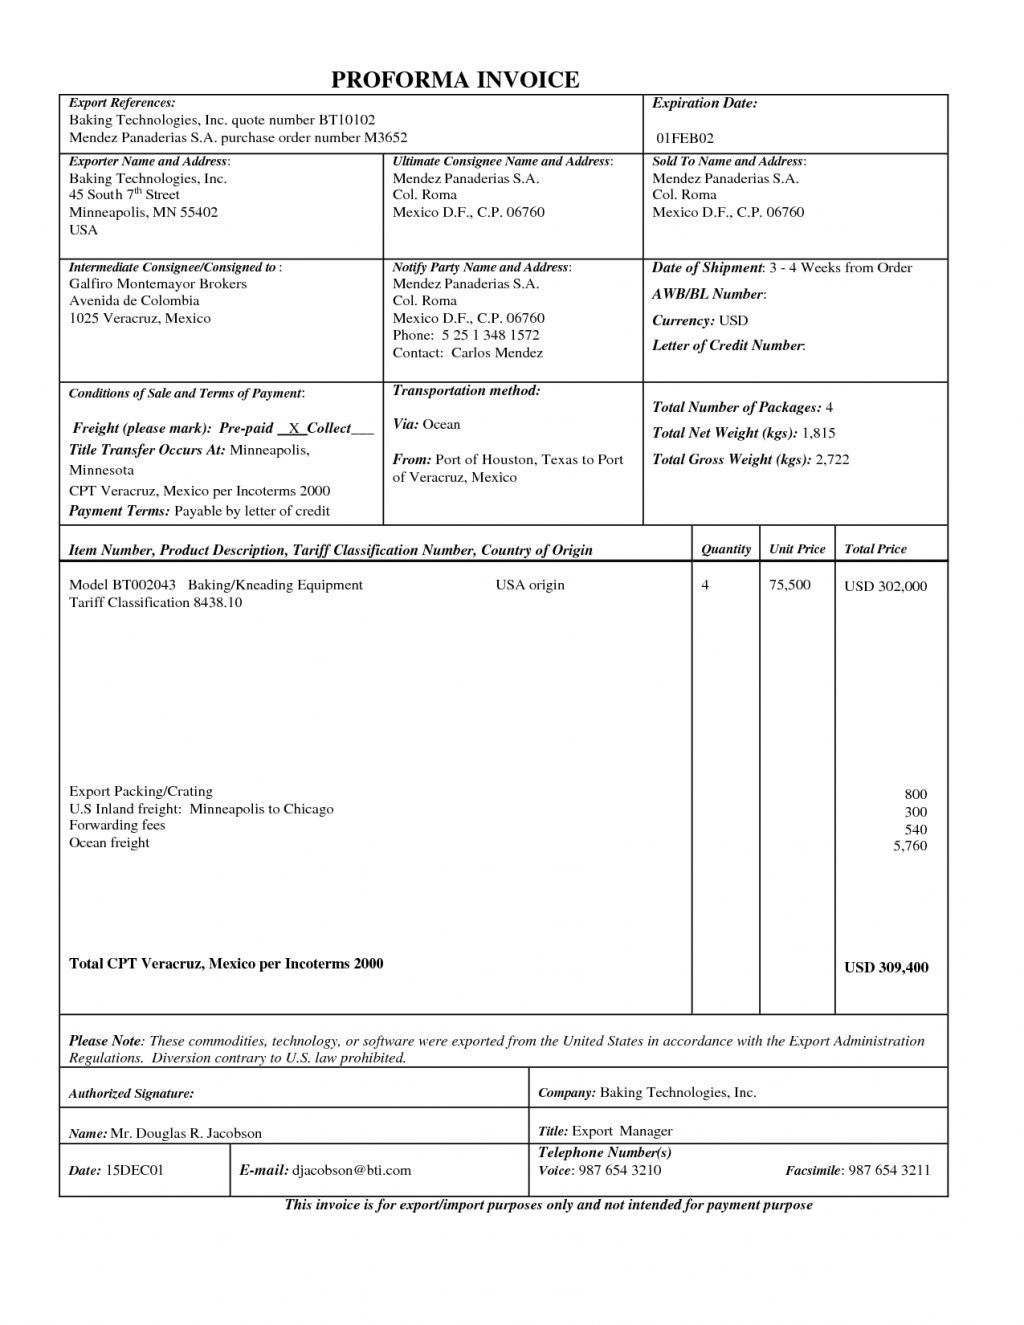 Sample Proforma Invoice For Export